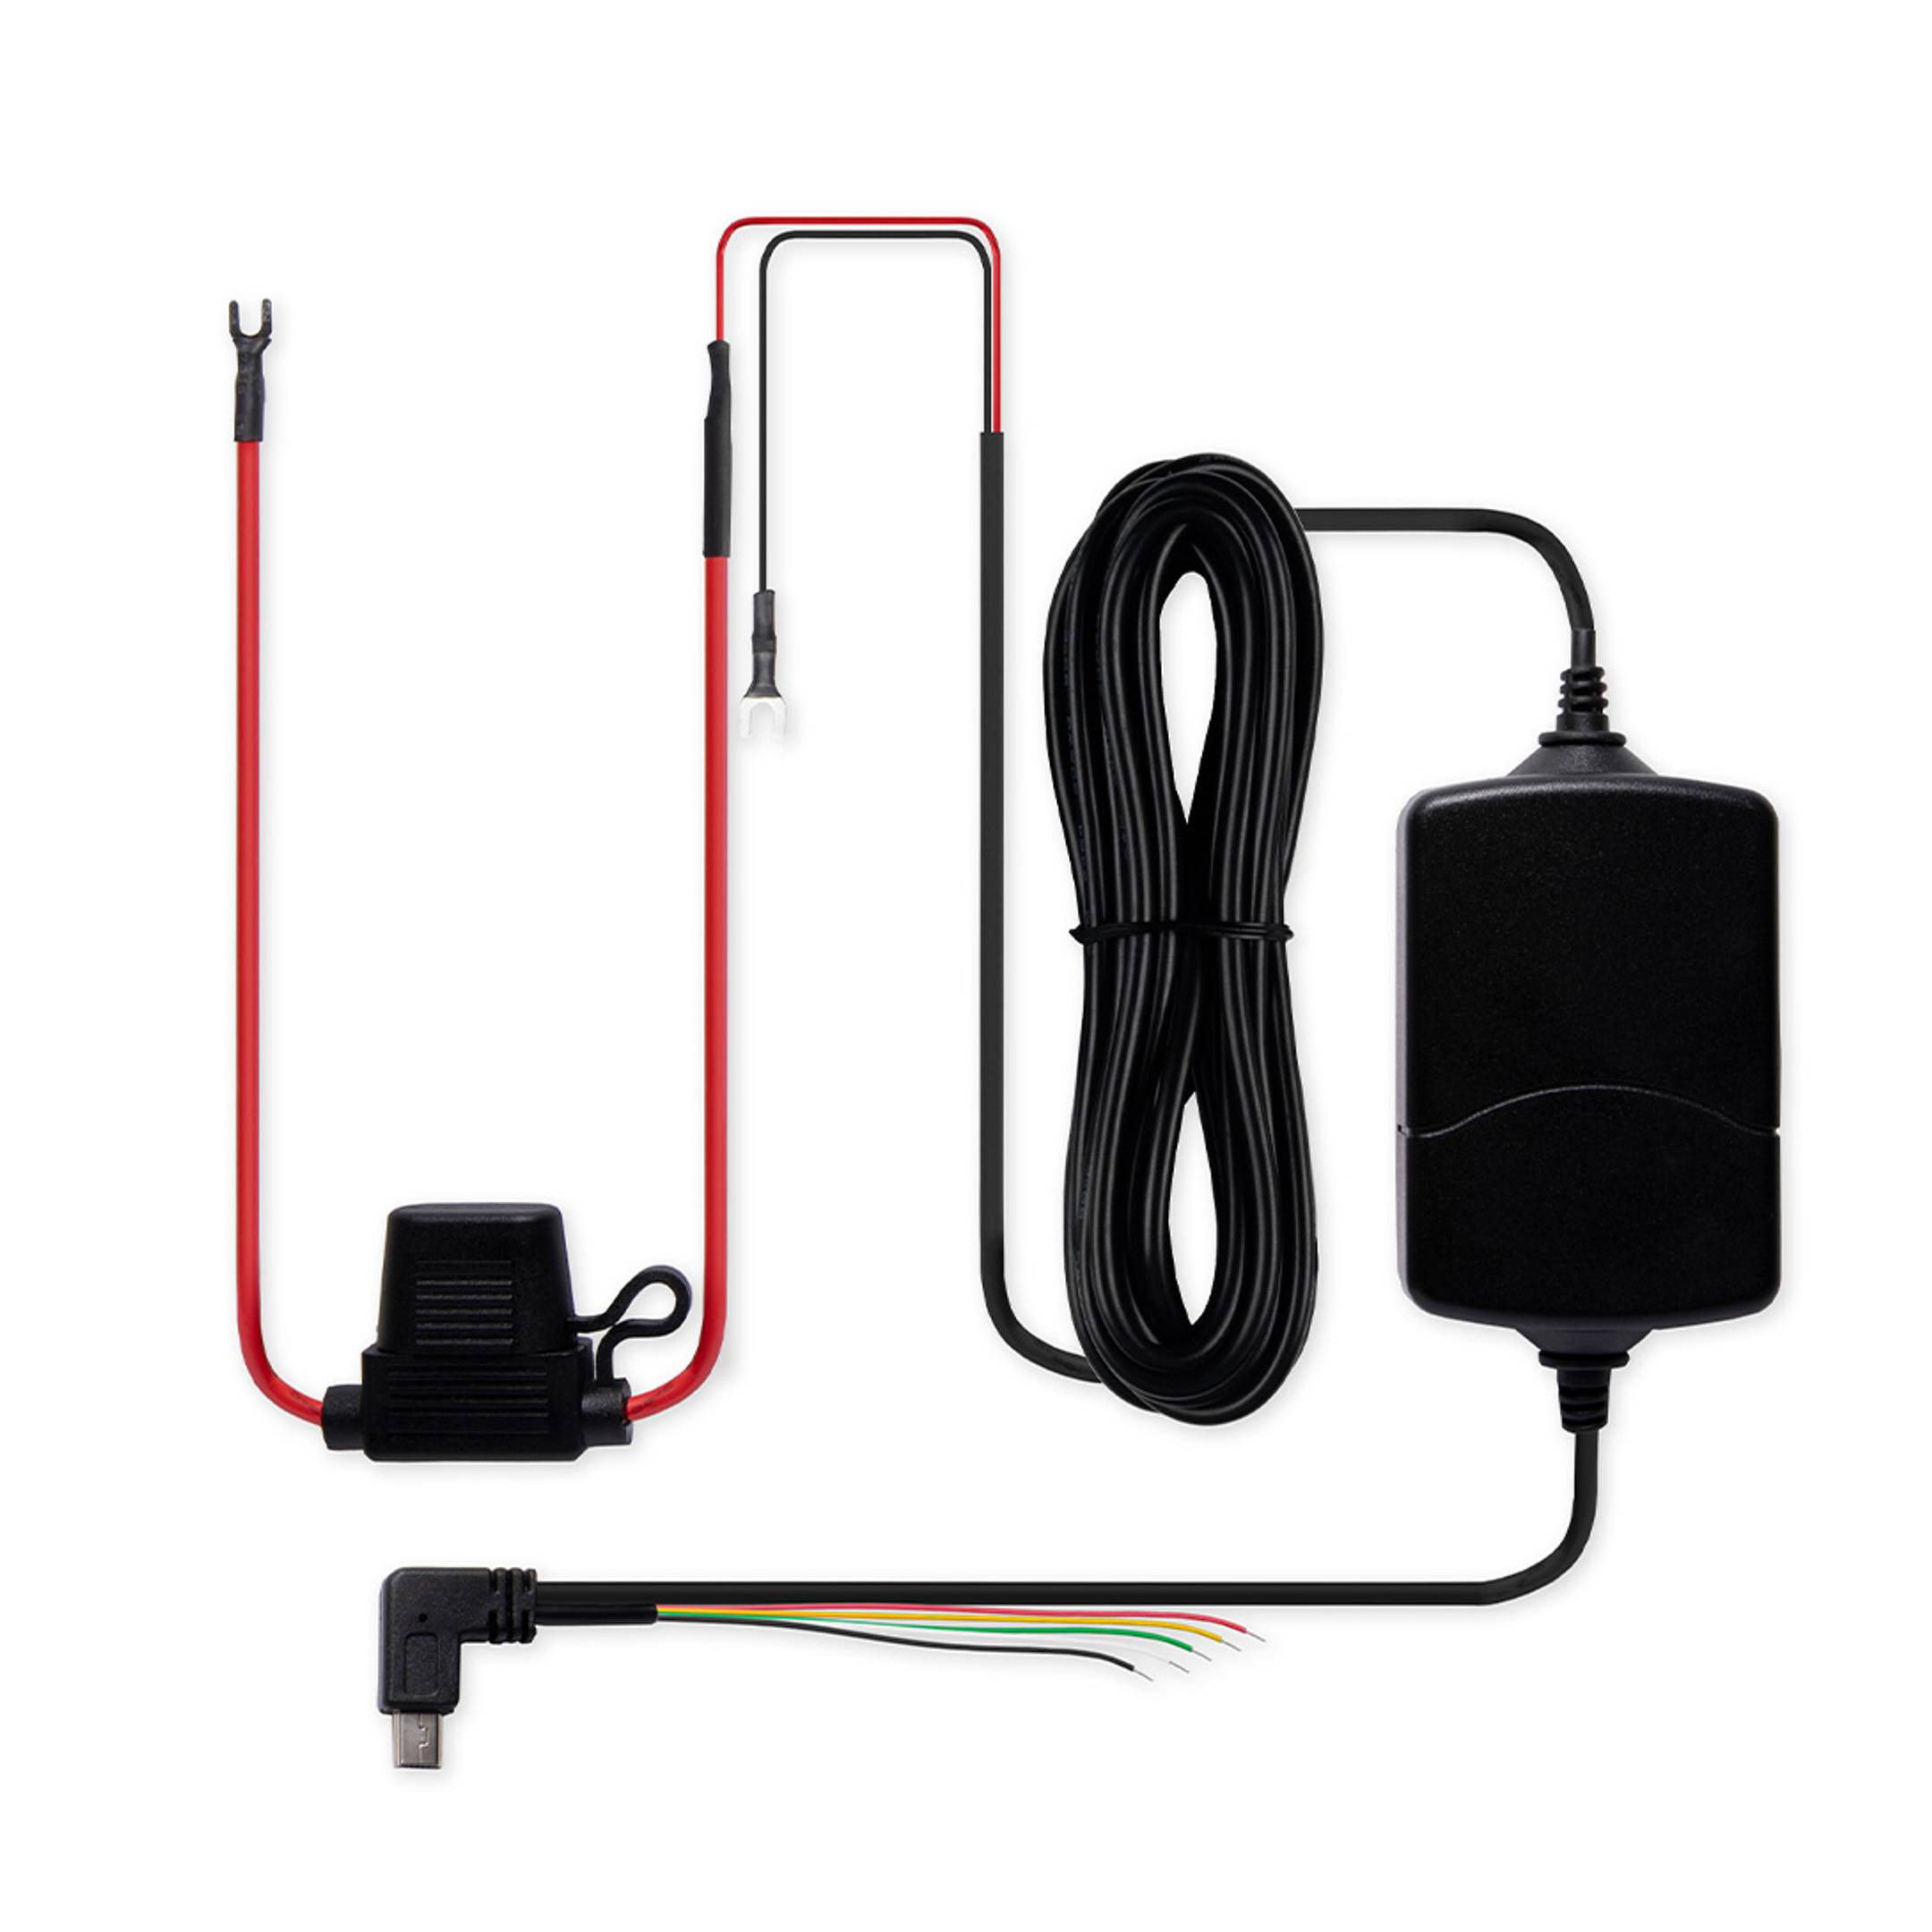 Hardwire Kit for GL300 Series GPS Trackers | GPS Tracking Devices